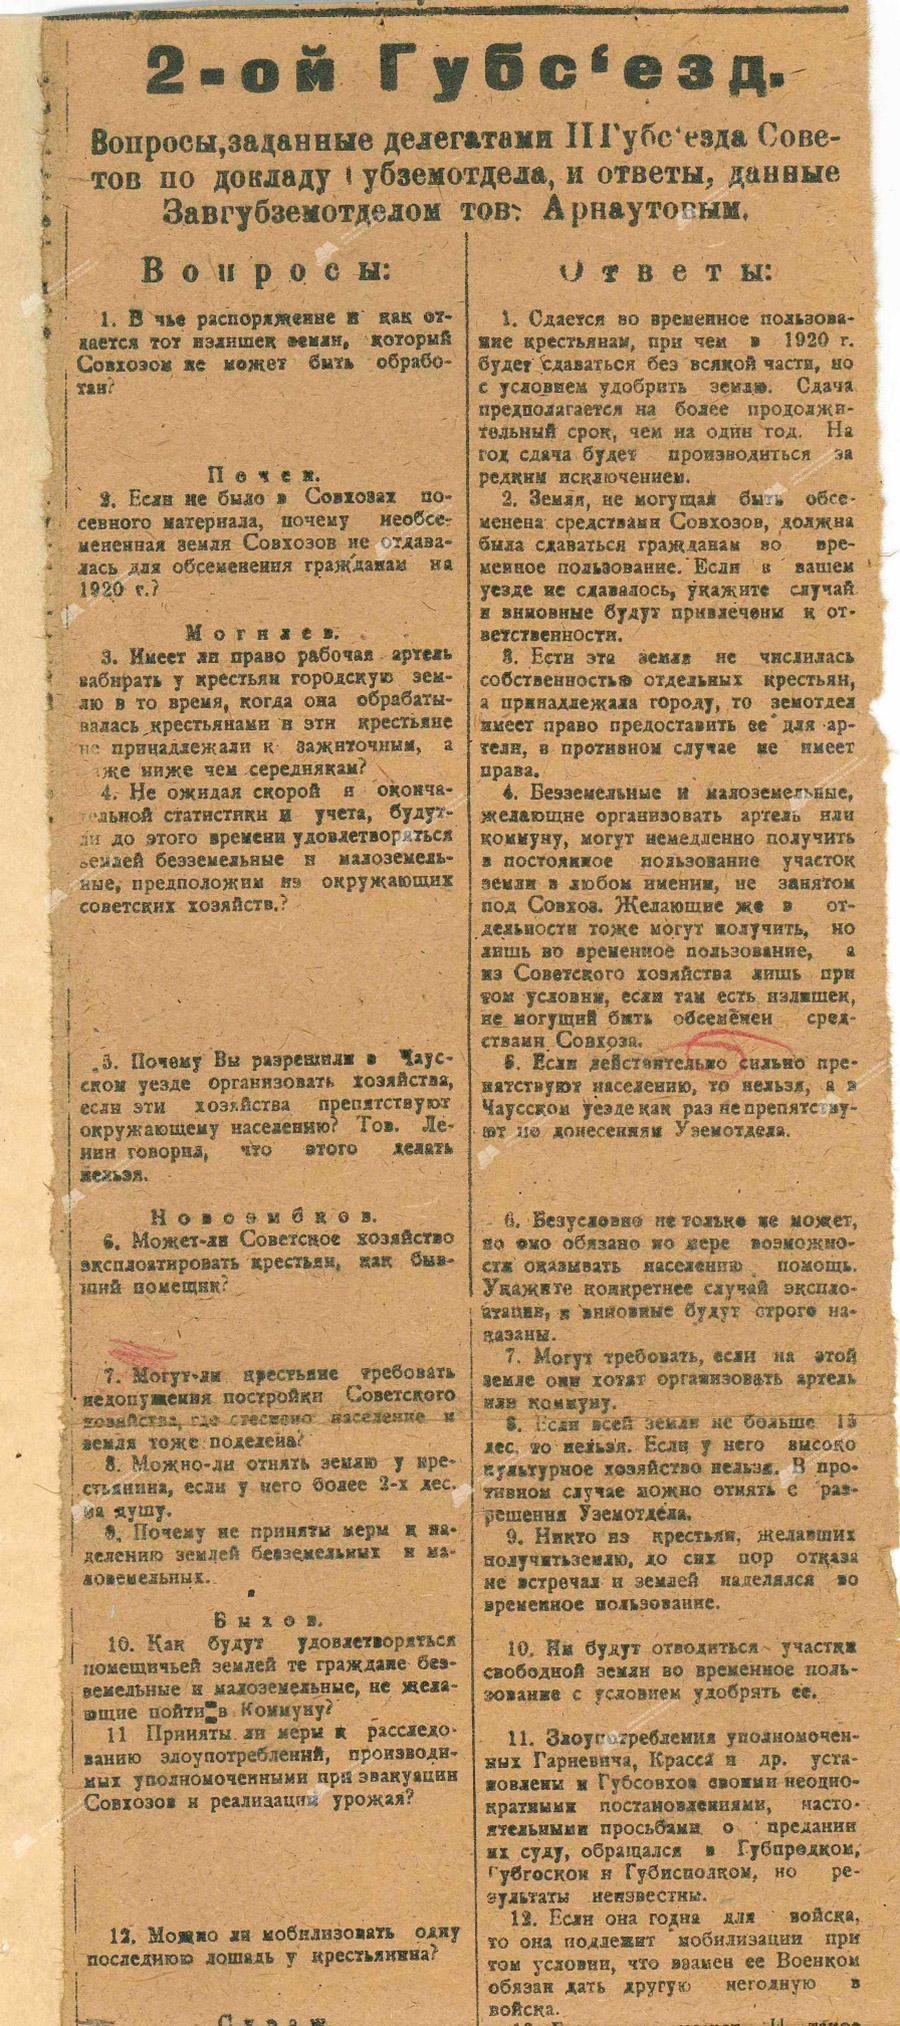 Questions asked by the delegates of the Second Gubernia Congress of Soviets on the report of the provincial land department and answers given by the Head of the Gubernia Land Department, Comrade Arnautov-с. 0